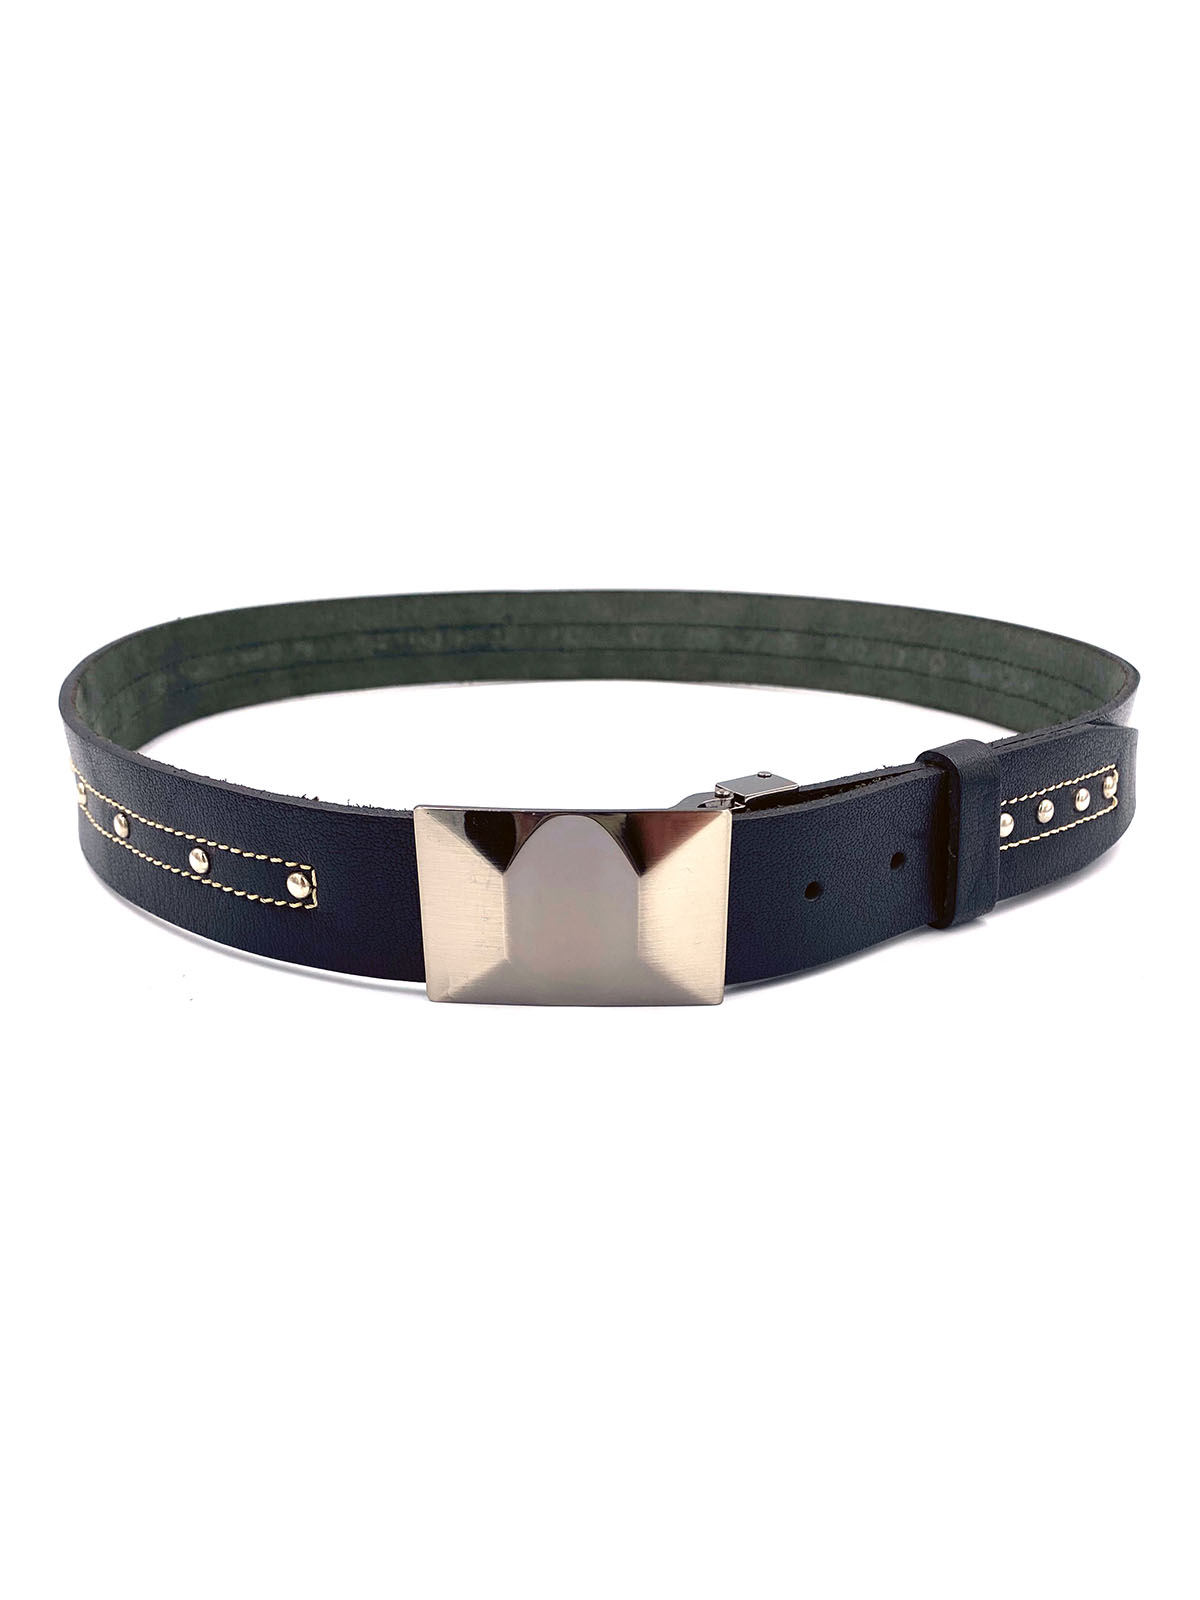 Sports belt with metal plate - 10405 - € 10.12 img2